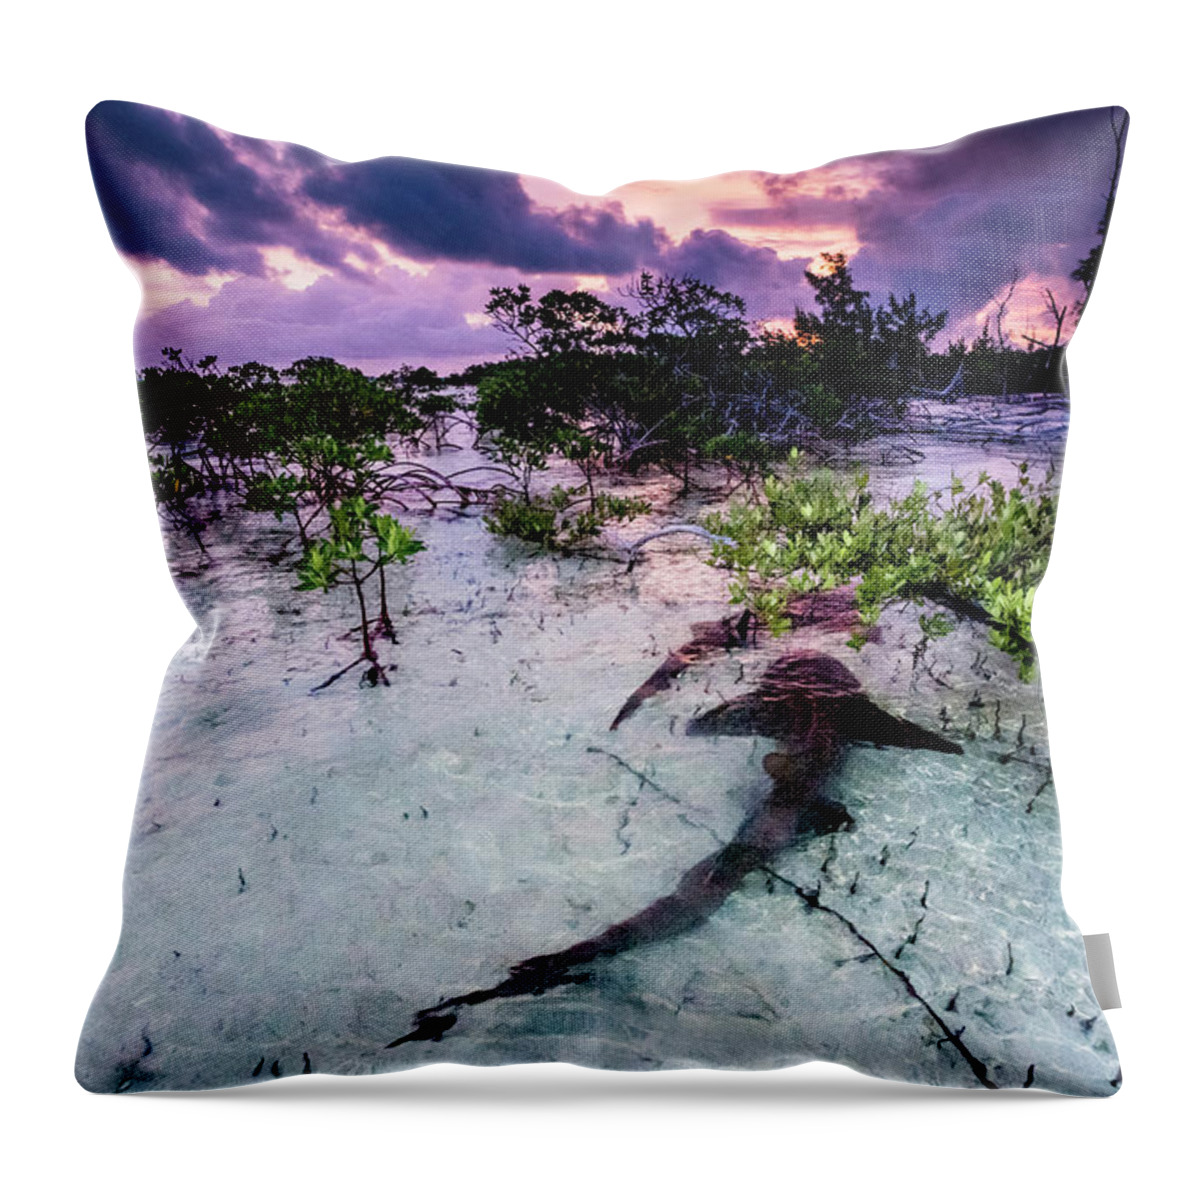 Animal Throw Pillow featuring the photograph Nurse Sharks Three In A Courtship Dance At Sunrise In A by Shane Gross / Naturepl.com